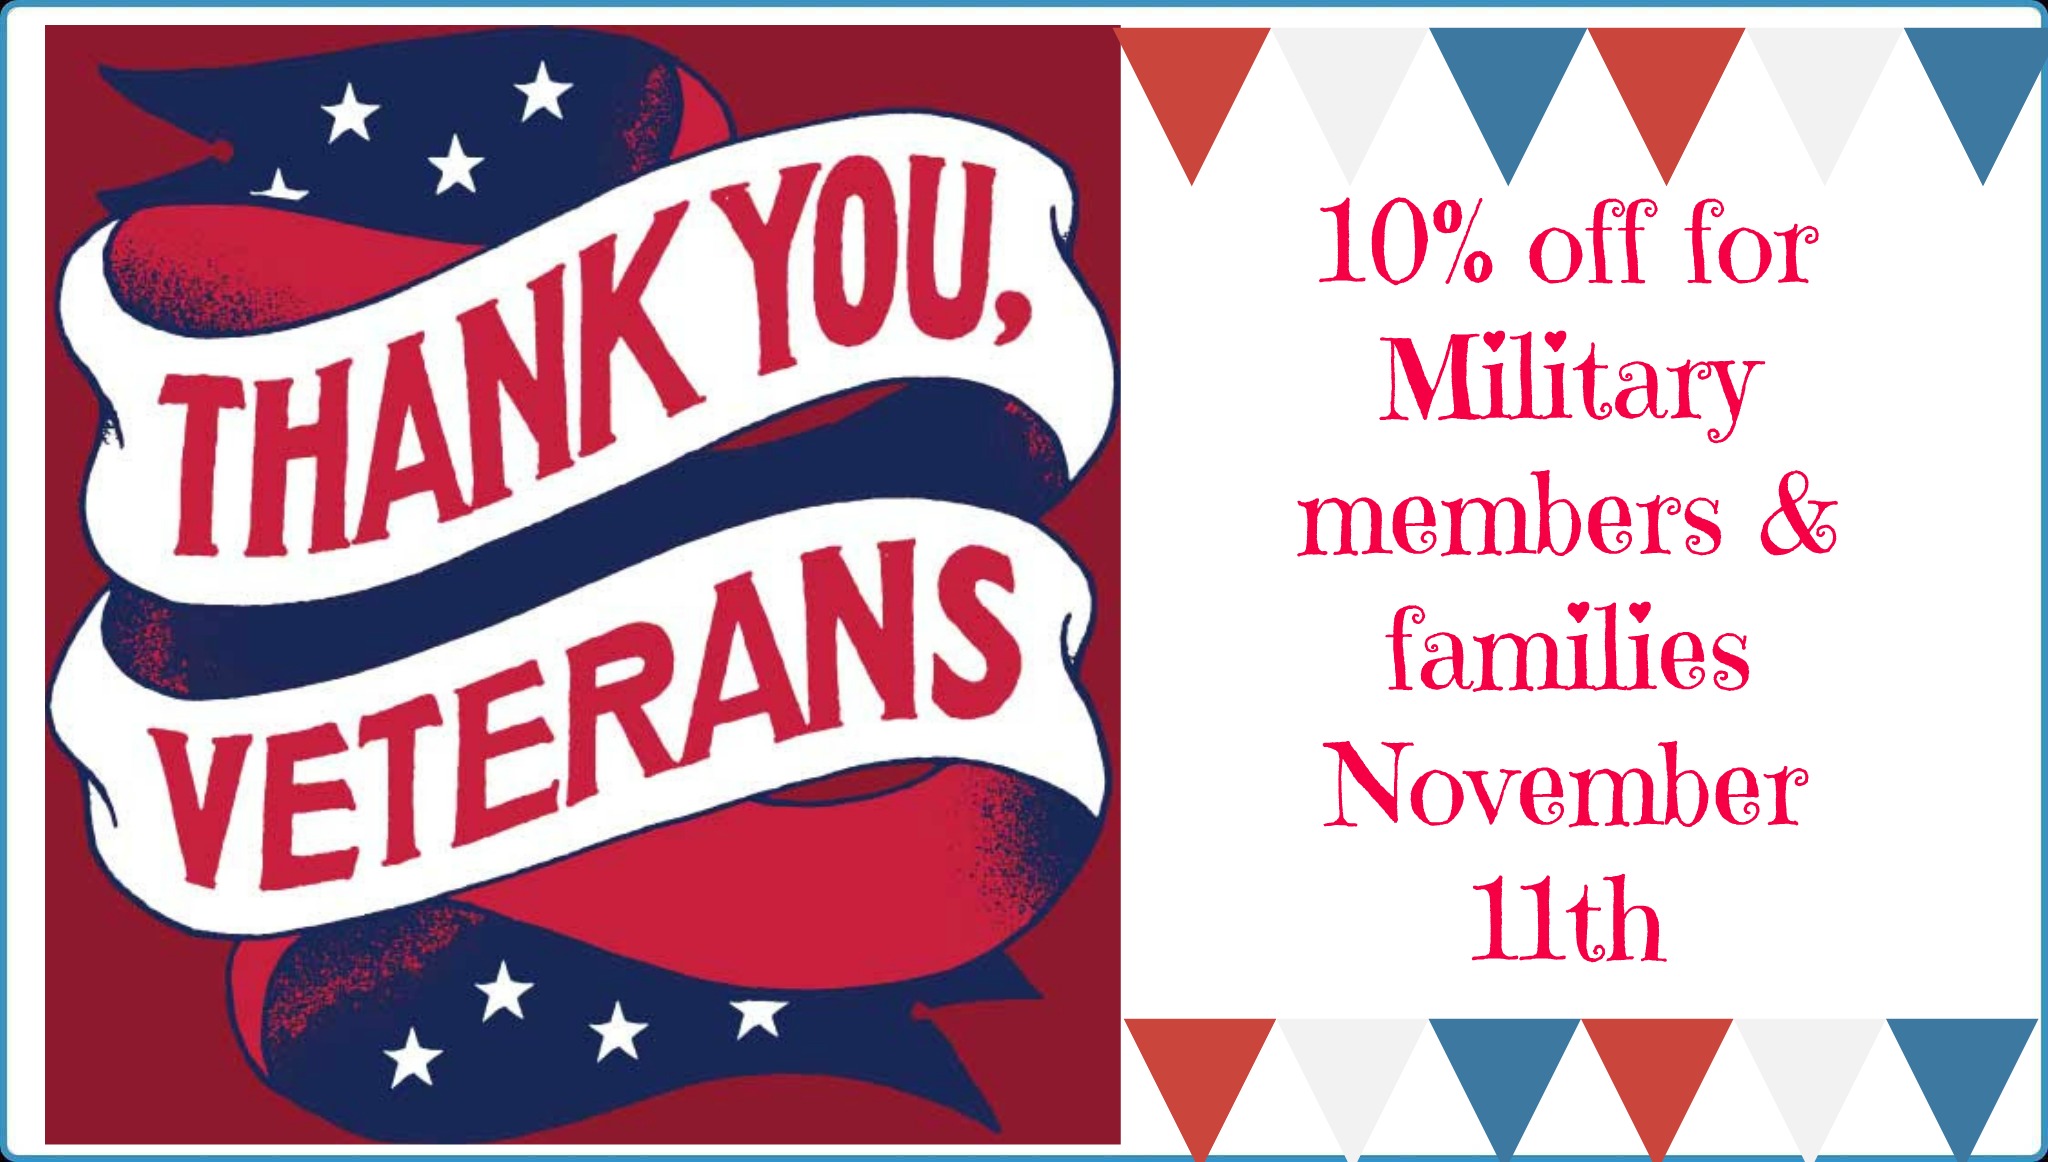 An extra 10 off for Veterans, military personnel, and their families